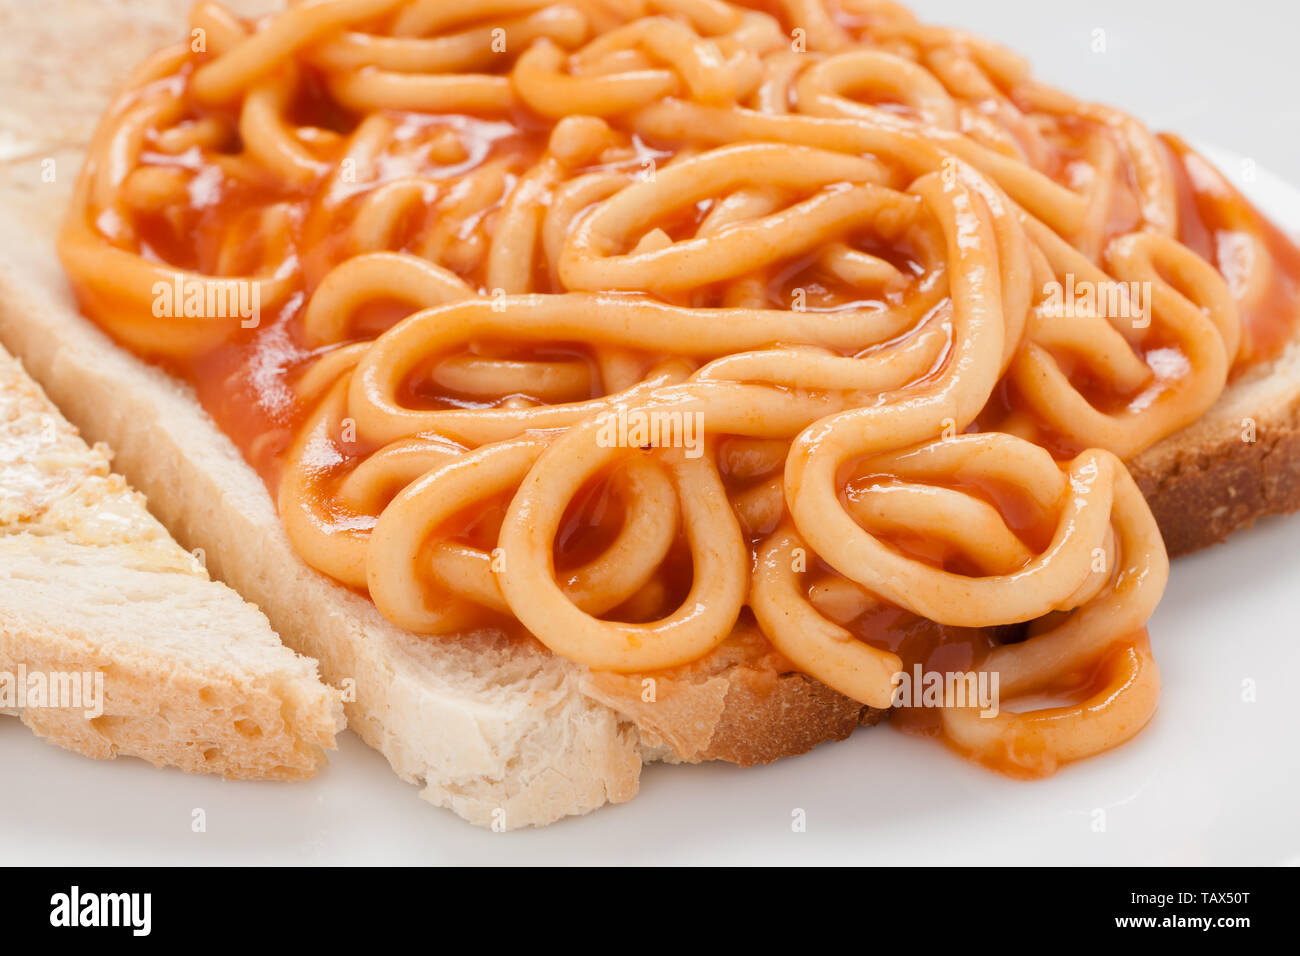 Canned spaghetti on toast a simple and quick meal for those on a budget Stock Photo